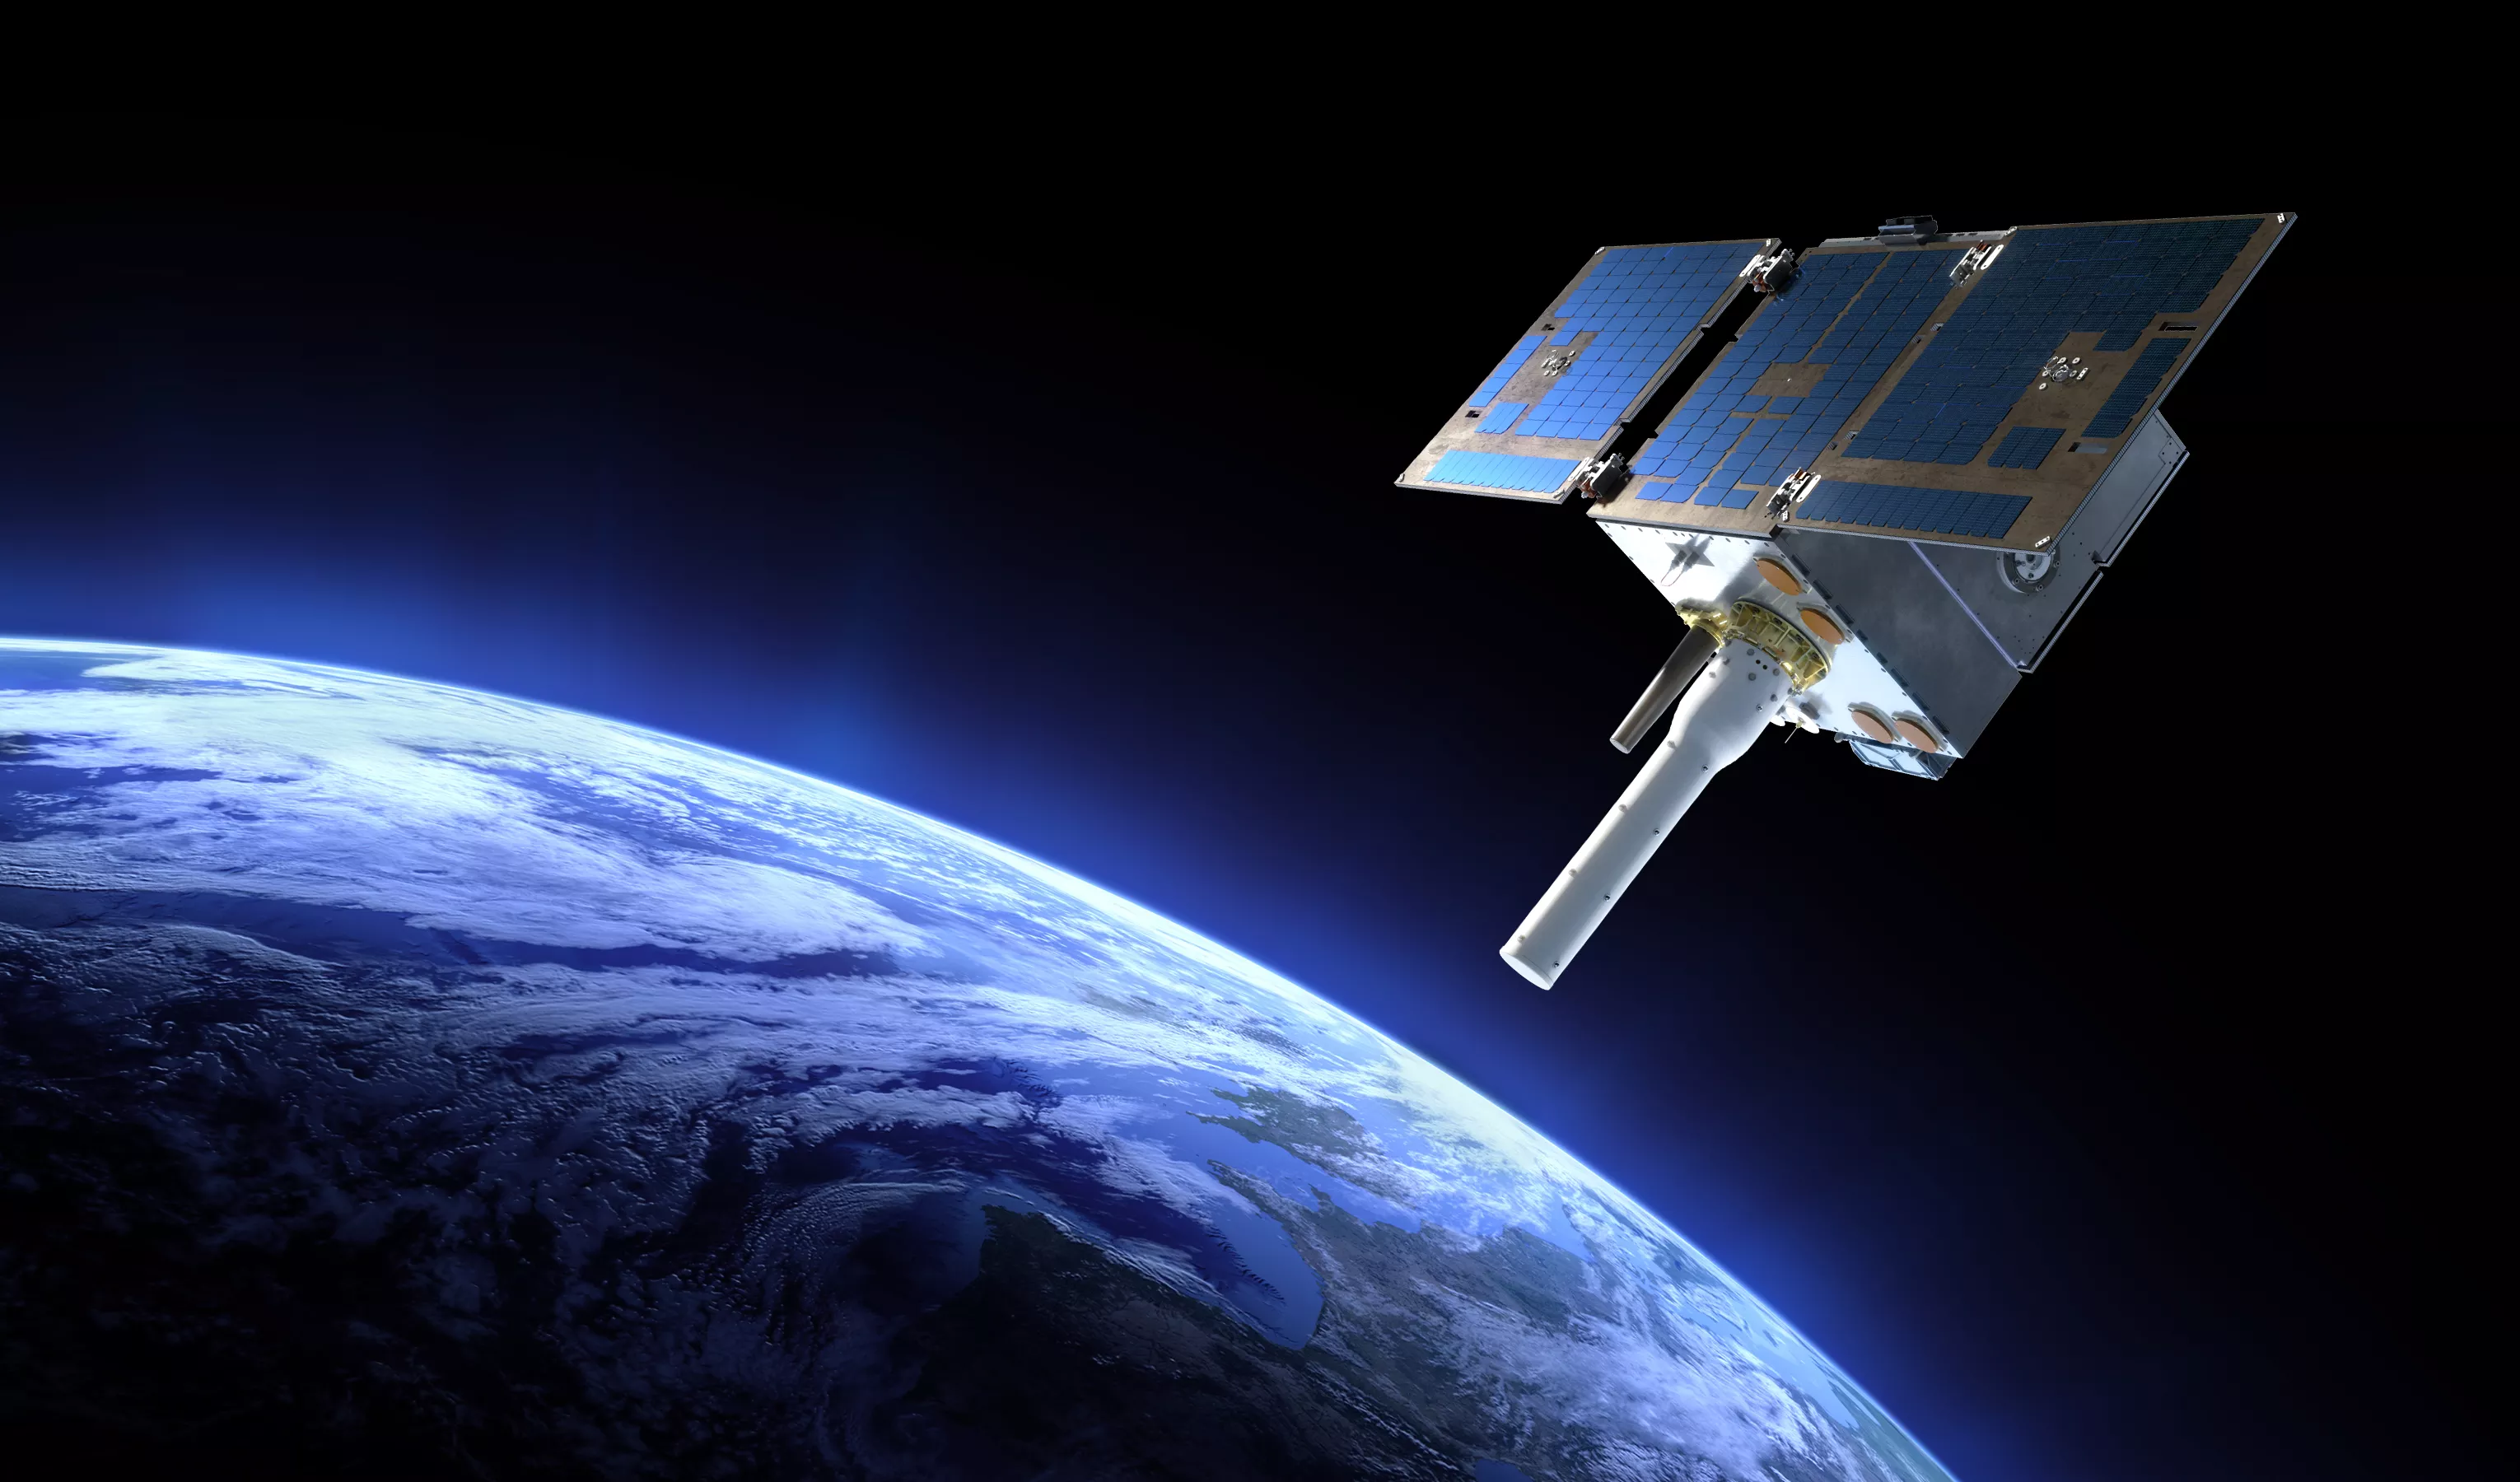 An artist's rendering of the satellite carrying the Argos-4 instrument